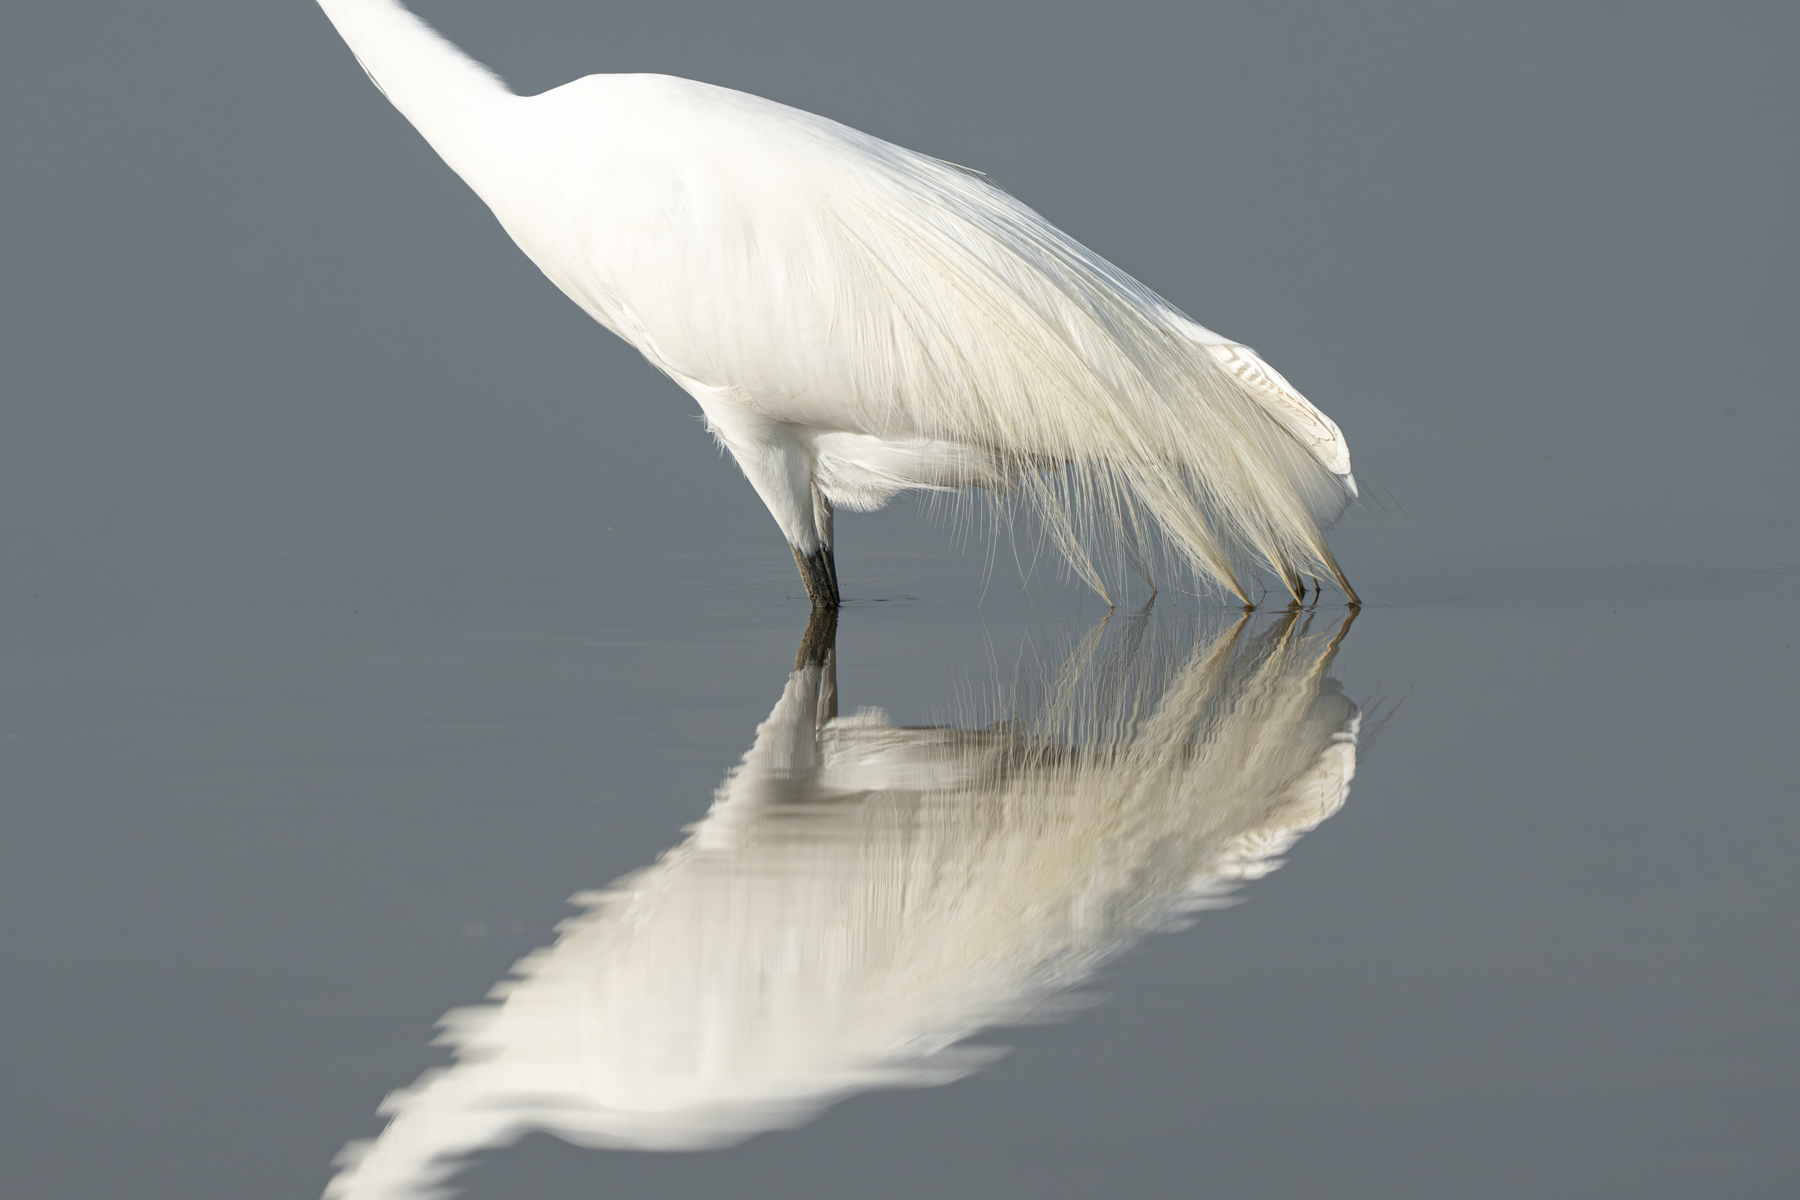 The elegant aigrette feathers of a Great Egret (image by Inger Vandyke)